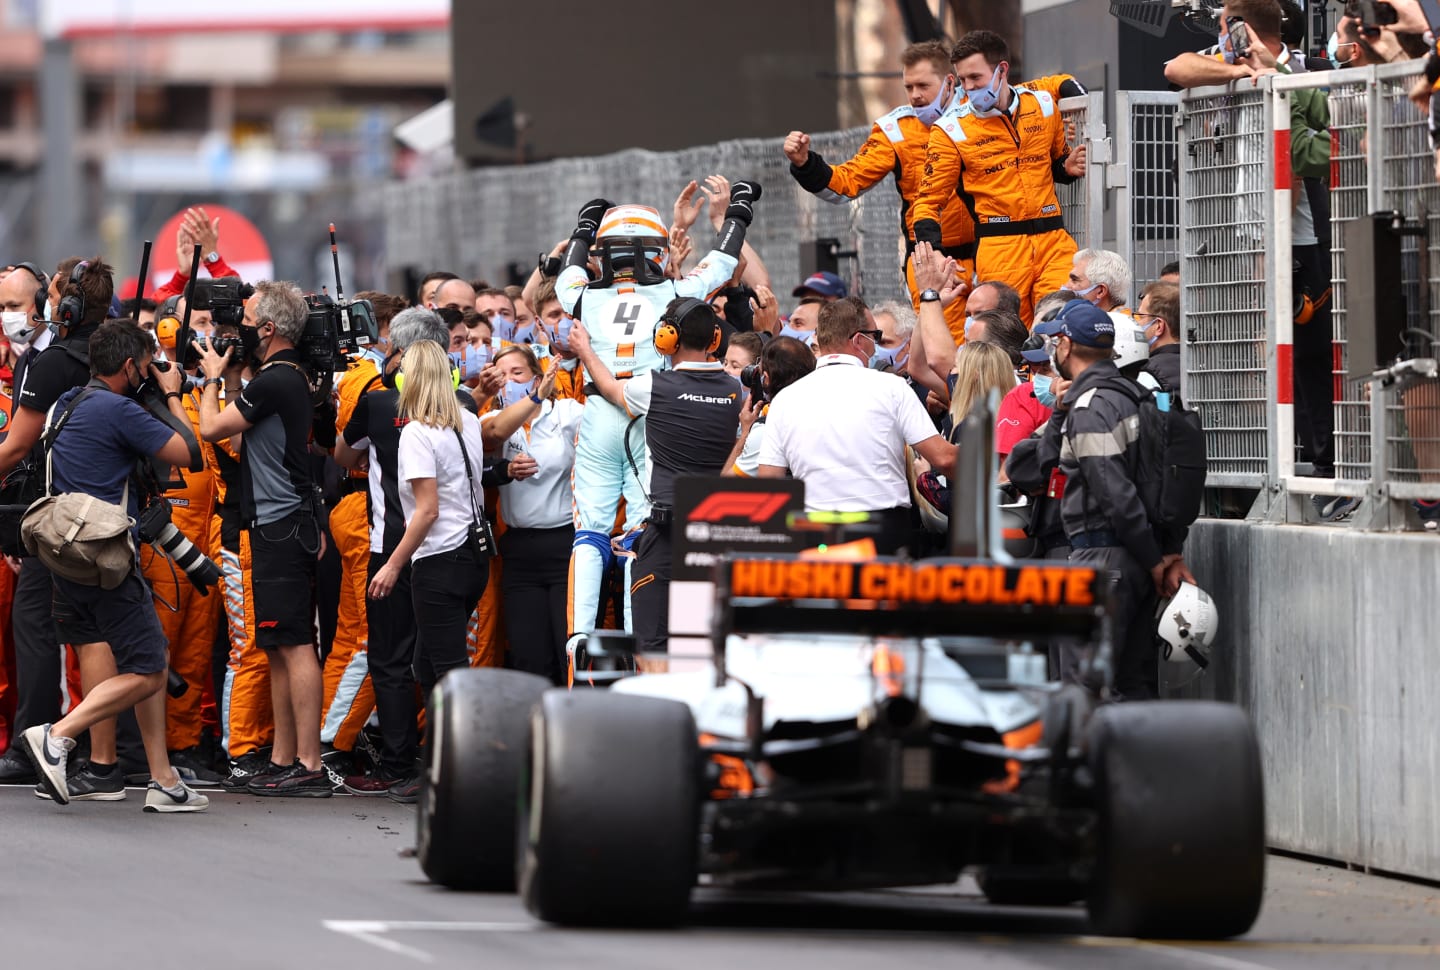 MONTE-CARLO, MONACO - MAY 23: Third placed Lando Norris of Great Britain and McLaren F1 celebrates with his team in parc ferme during the F1 Grand Prix of Monaco at Circuit de Monaco on May 23, 2021 in Monte-Carlo, Monaco. (Photo by Lars Baron/Getty Images)